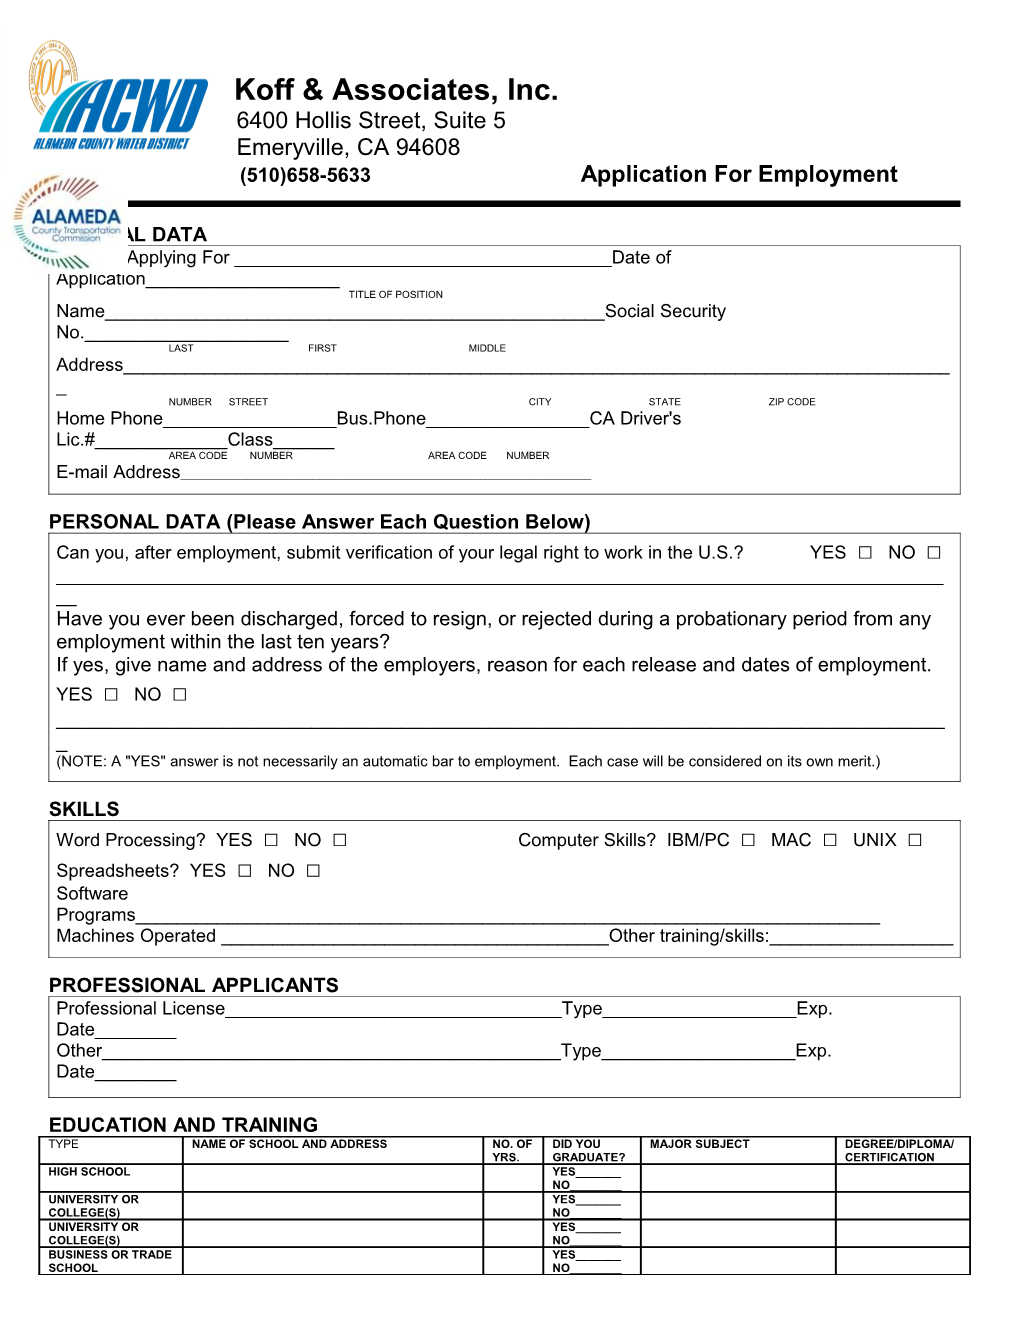 (510)658-5633 Application for Employment